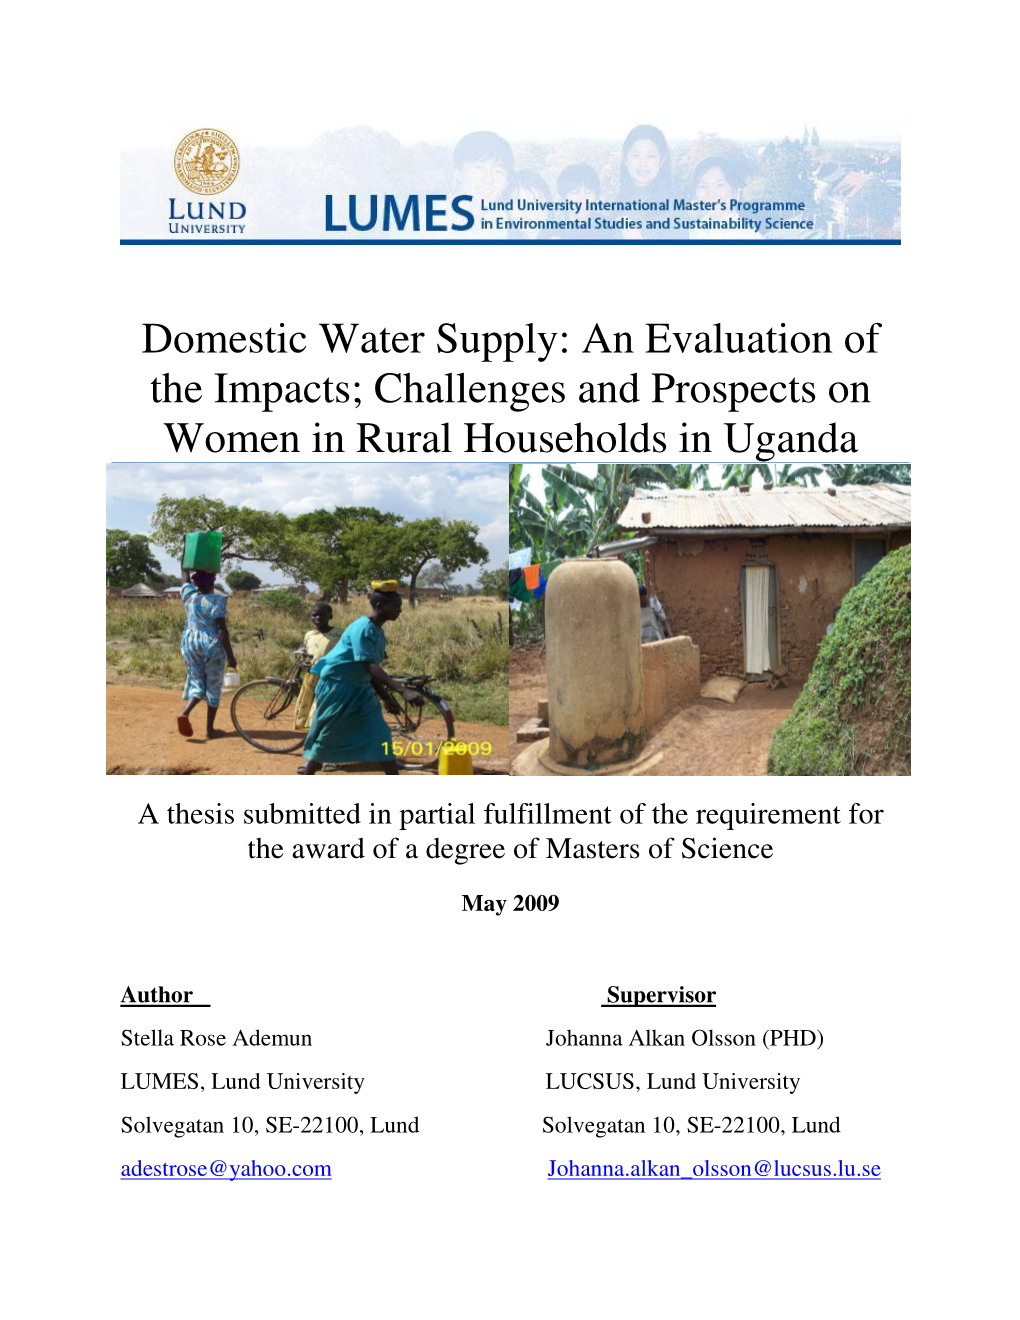 Domestic Water Supply: an Evaluation of the Impacts; Challenges and Prospects on Women in Rural Households in Uganda